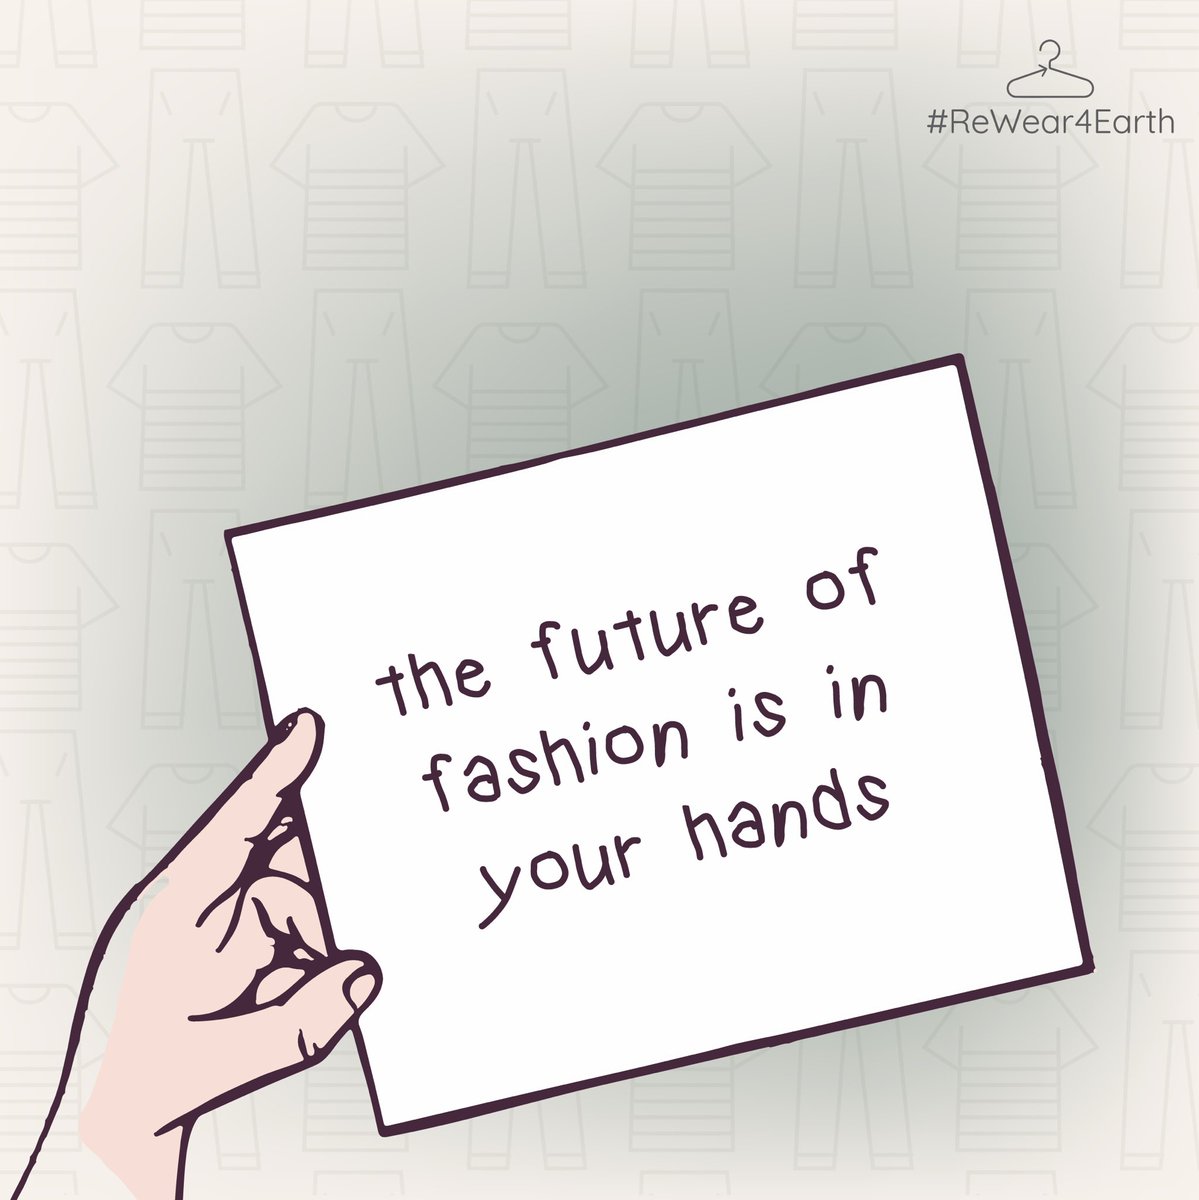 “Sustainable fashion is not a trend, but the future.” - Antonia Böhike 
.
.
.
.

#nofastfashion #responsiblefashion #sustainableliving #sustainablelife #sustainablelifestyle #consciousfashion #recycledfashion #restyle #vintagestyle #slowfashion #slowfashionmovement